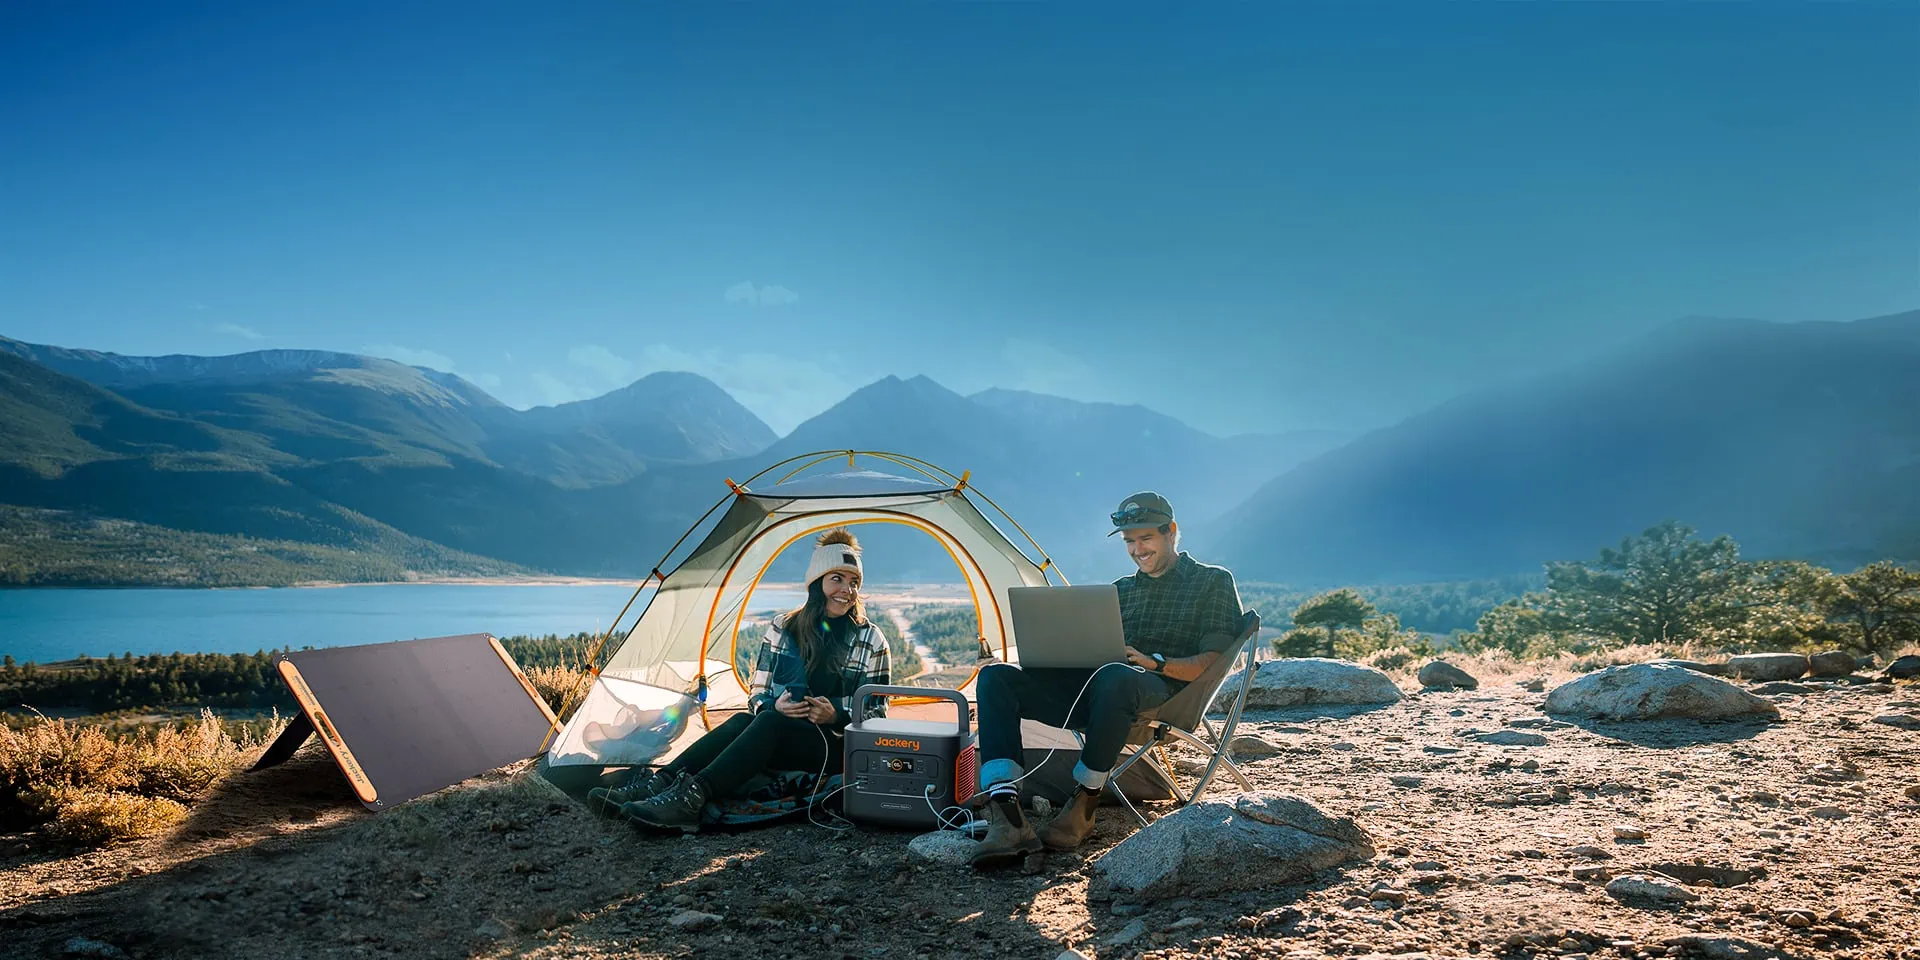 Jackery Explorer 1500 Pro launched in UK for £1500, Solar Generator 1500 Pro for £2100 – Up to £110 Discount Available